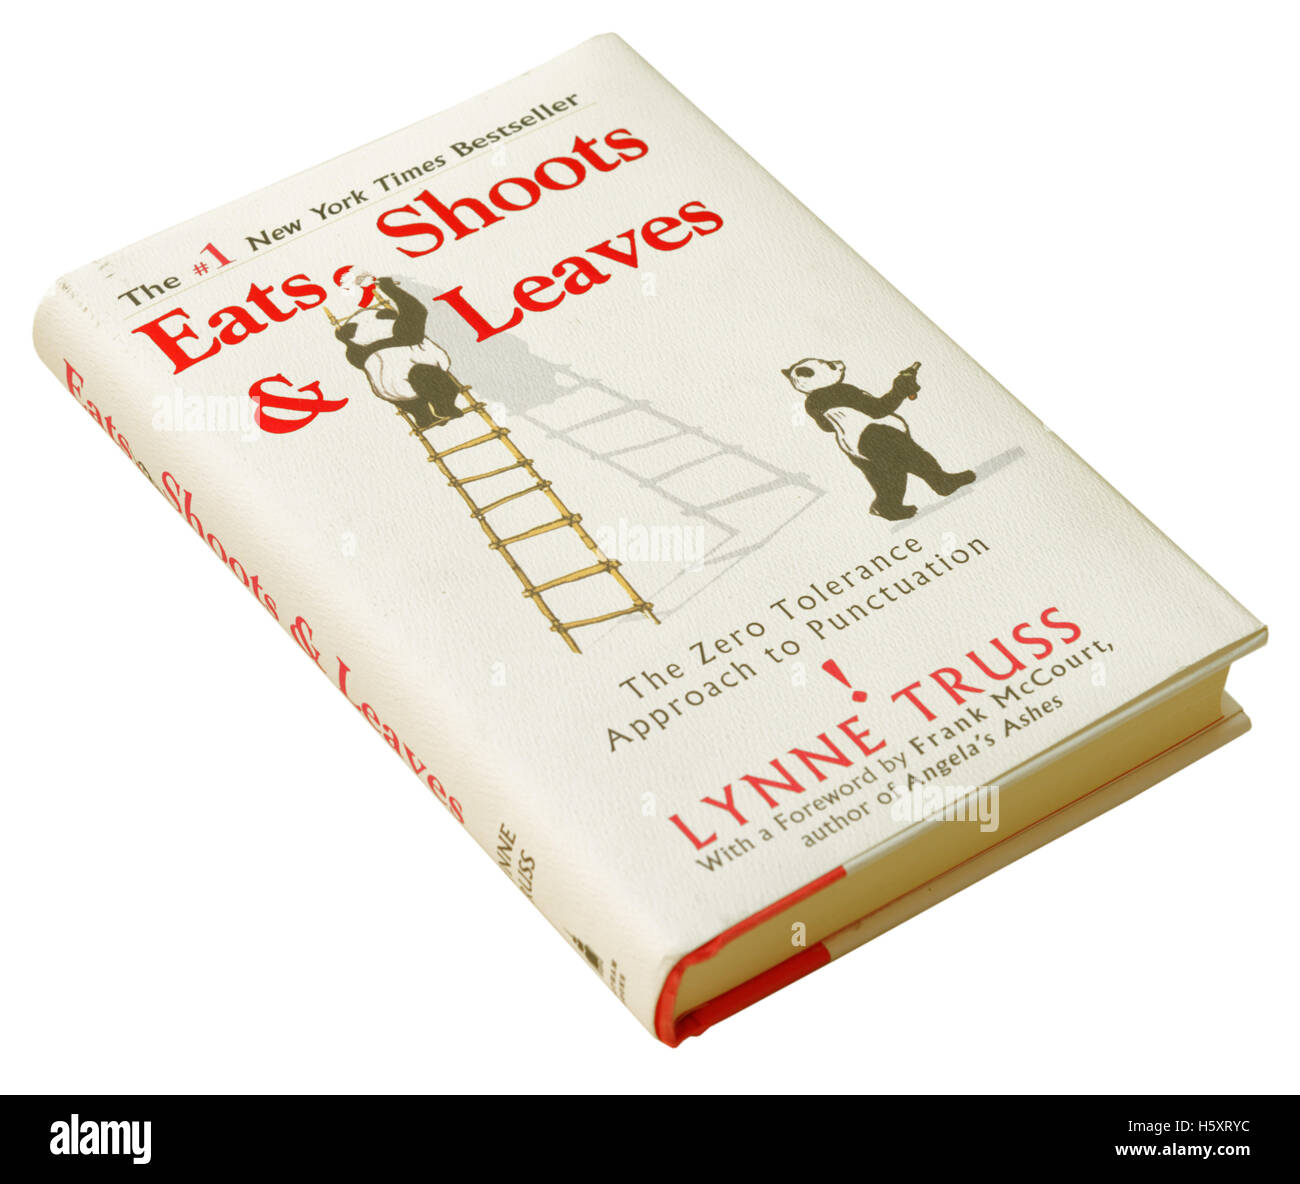 Eats Shoots and Leaves by Lynne Truss Stock Photo